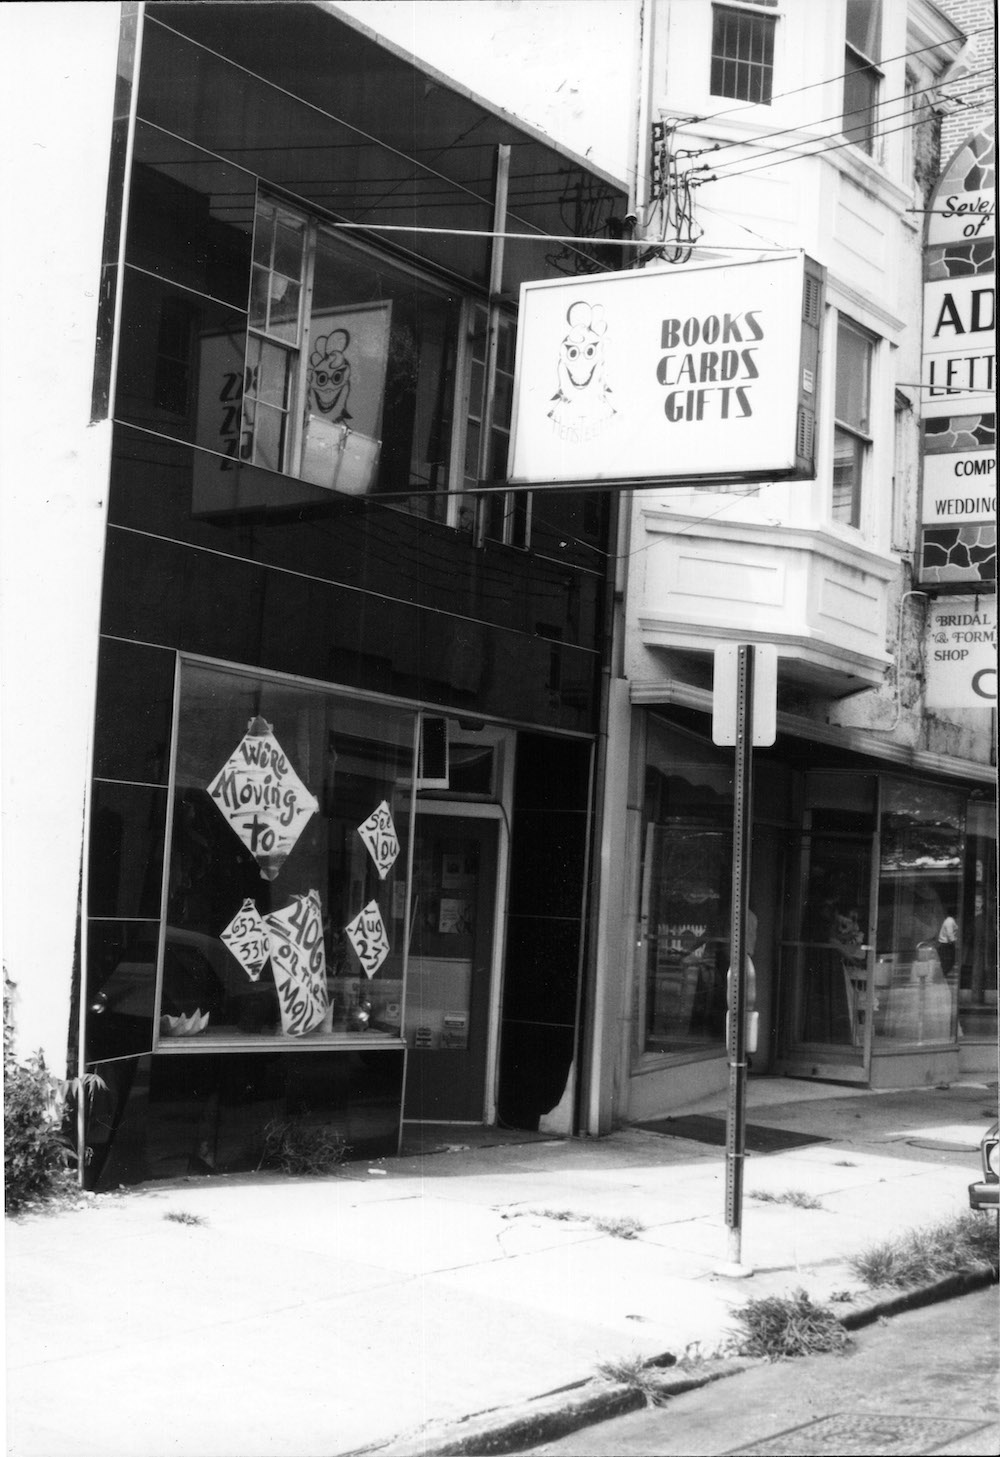 Hen’s Teeth, Delaware’s first queer bookstore, opens in Wilmington. 

Image: Hen’s Teeth Bookstore, shown in this photo circa 1984, was located at 6 E. 7th Street in Wilmington, DE.